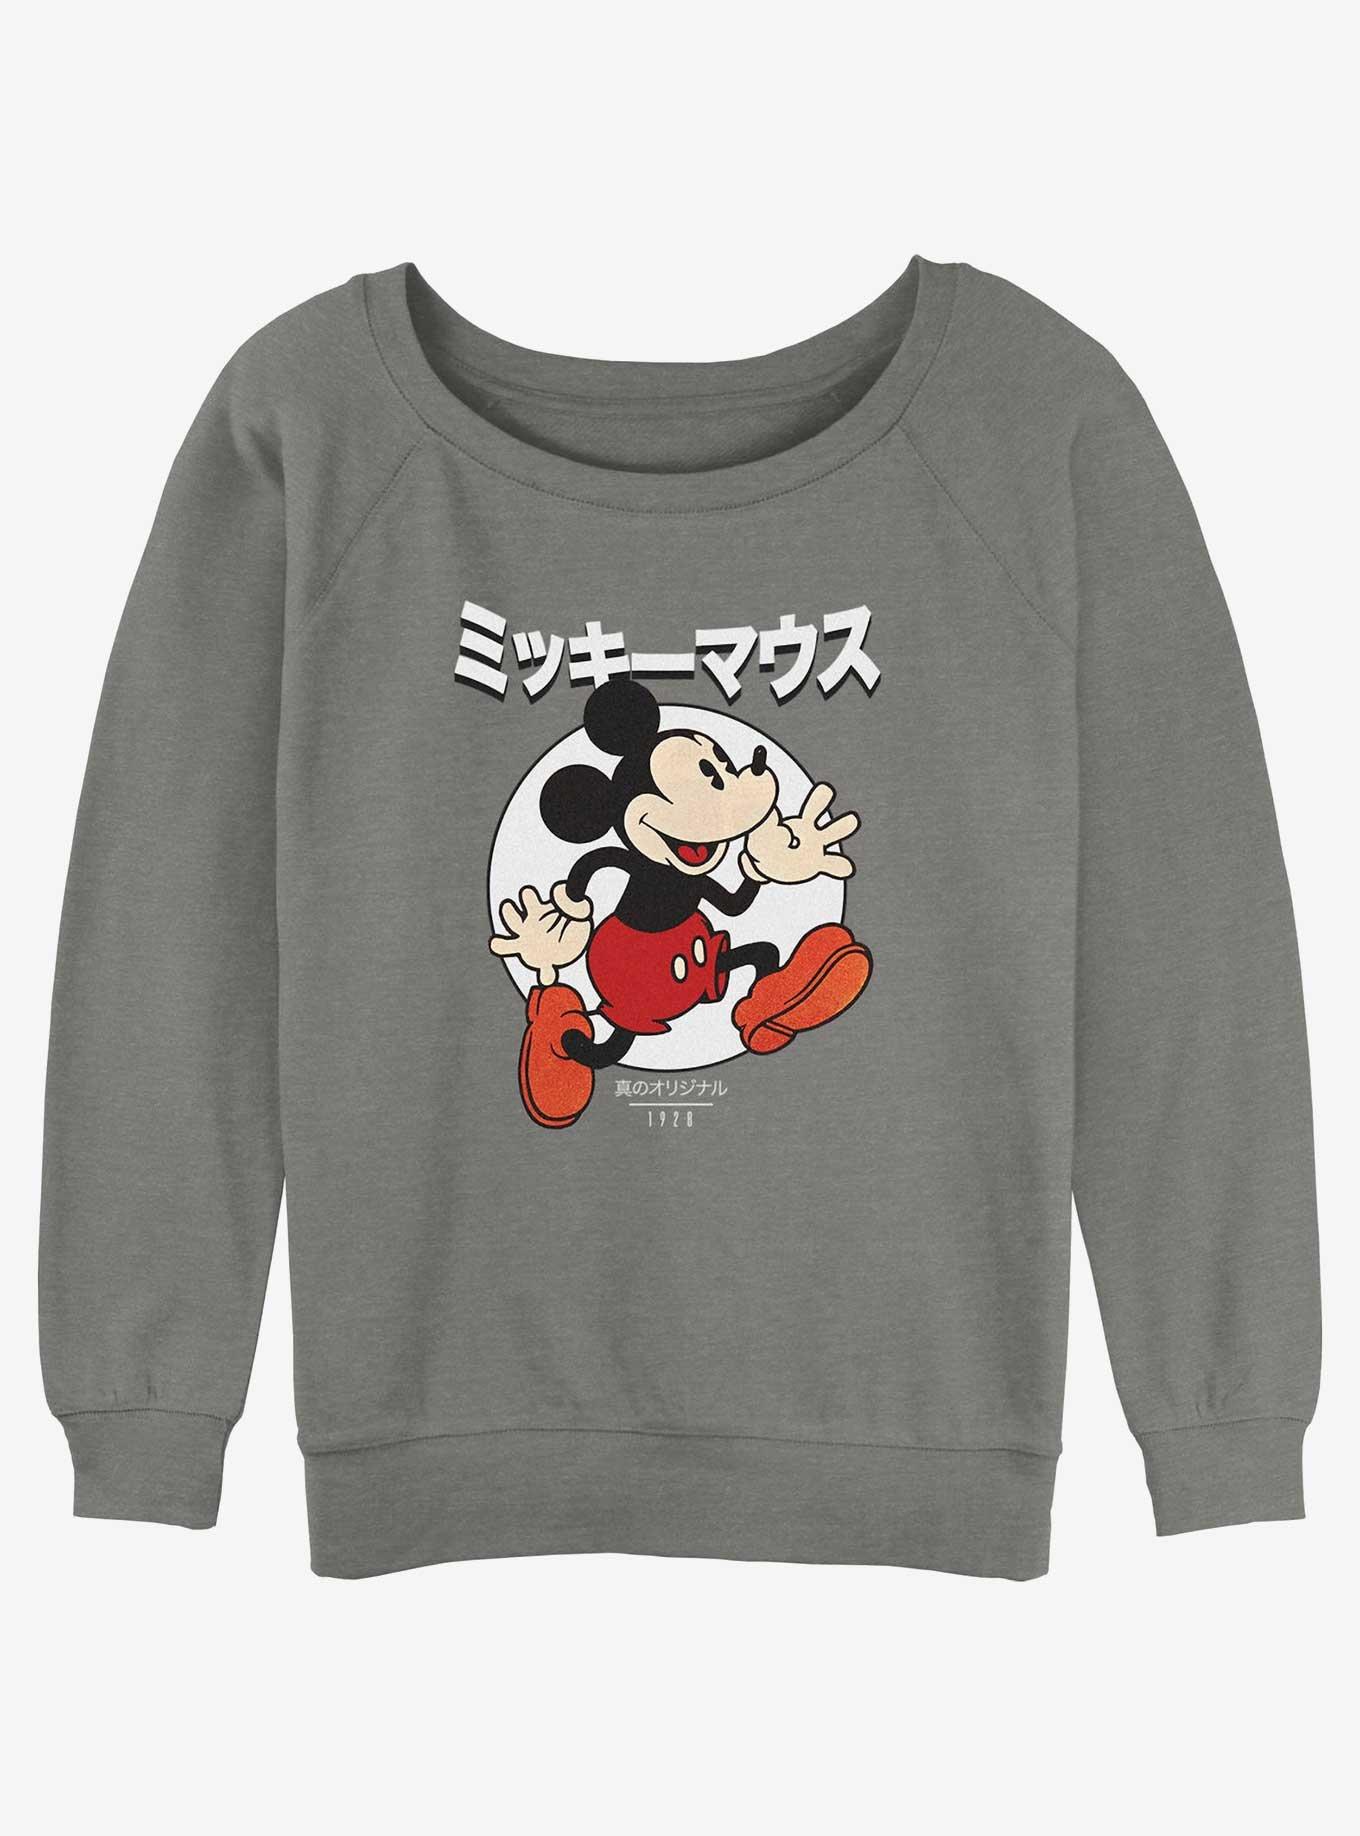 Disney Mickey Mouse Original Mouse in Japanese Girls Slouchy Sweatshirt, GRAY HTR, hi-res